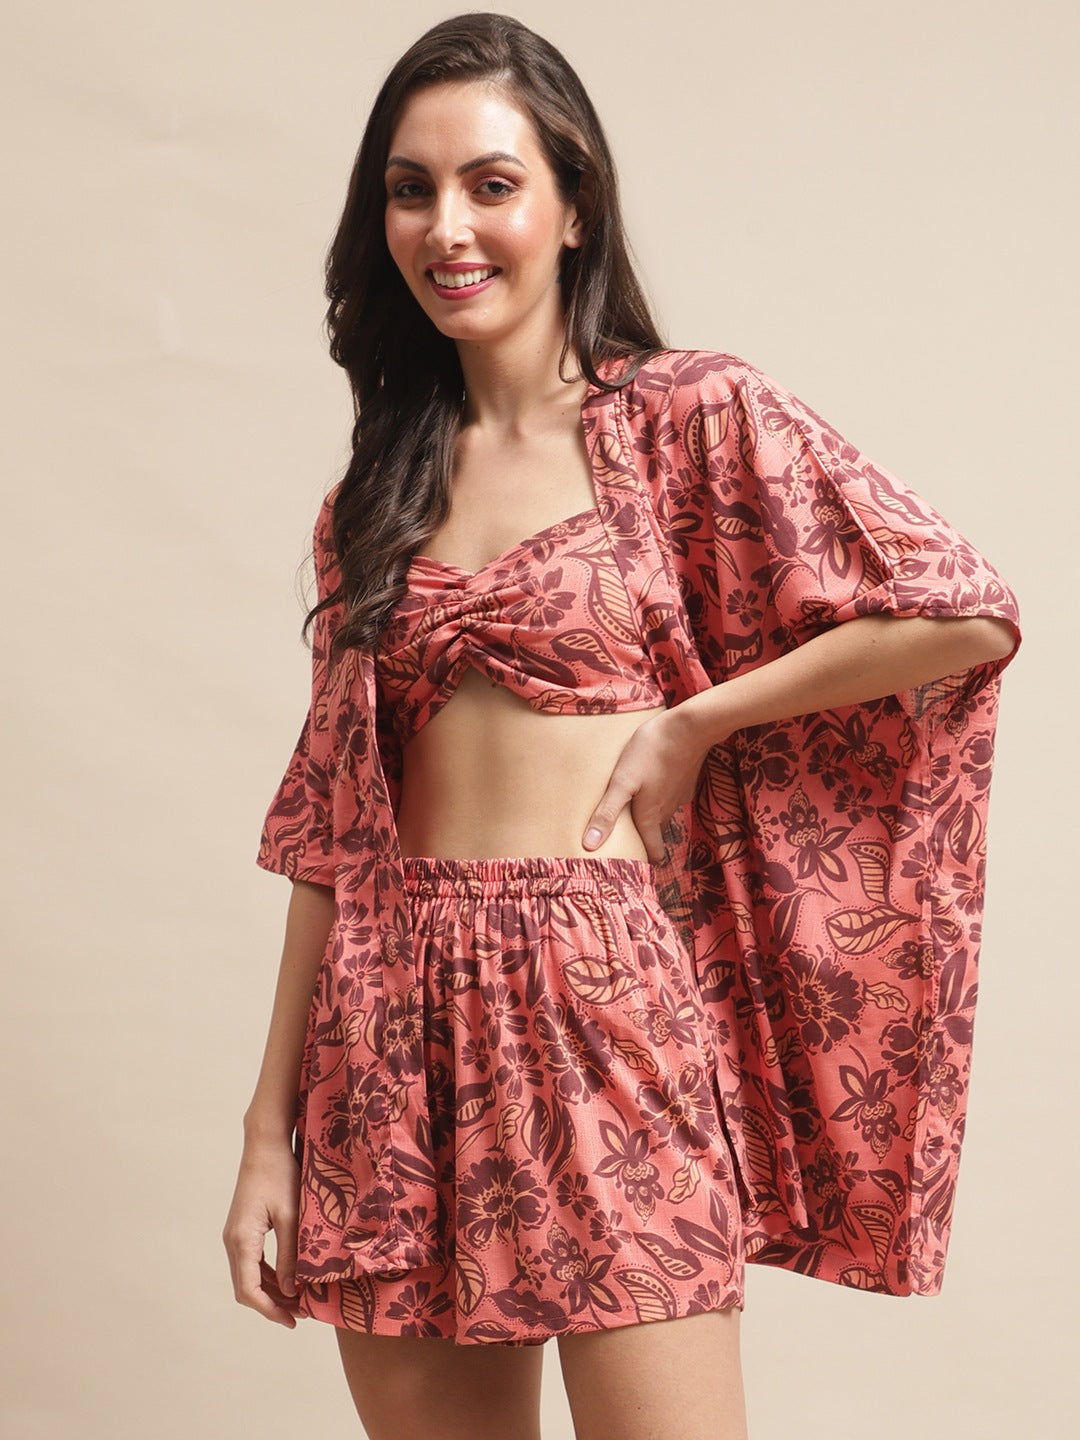 Rust Color Floral Viscose Rayon 3 pcs Coverup Set With Robe Beachwear For Woman Claura Designs Pvt. Ltd. Beachwear Beachwear, Beachwear_size, Coverup, Floral, Rayon, Rust color, Swimwear